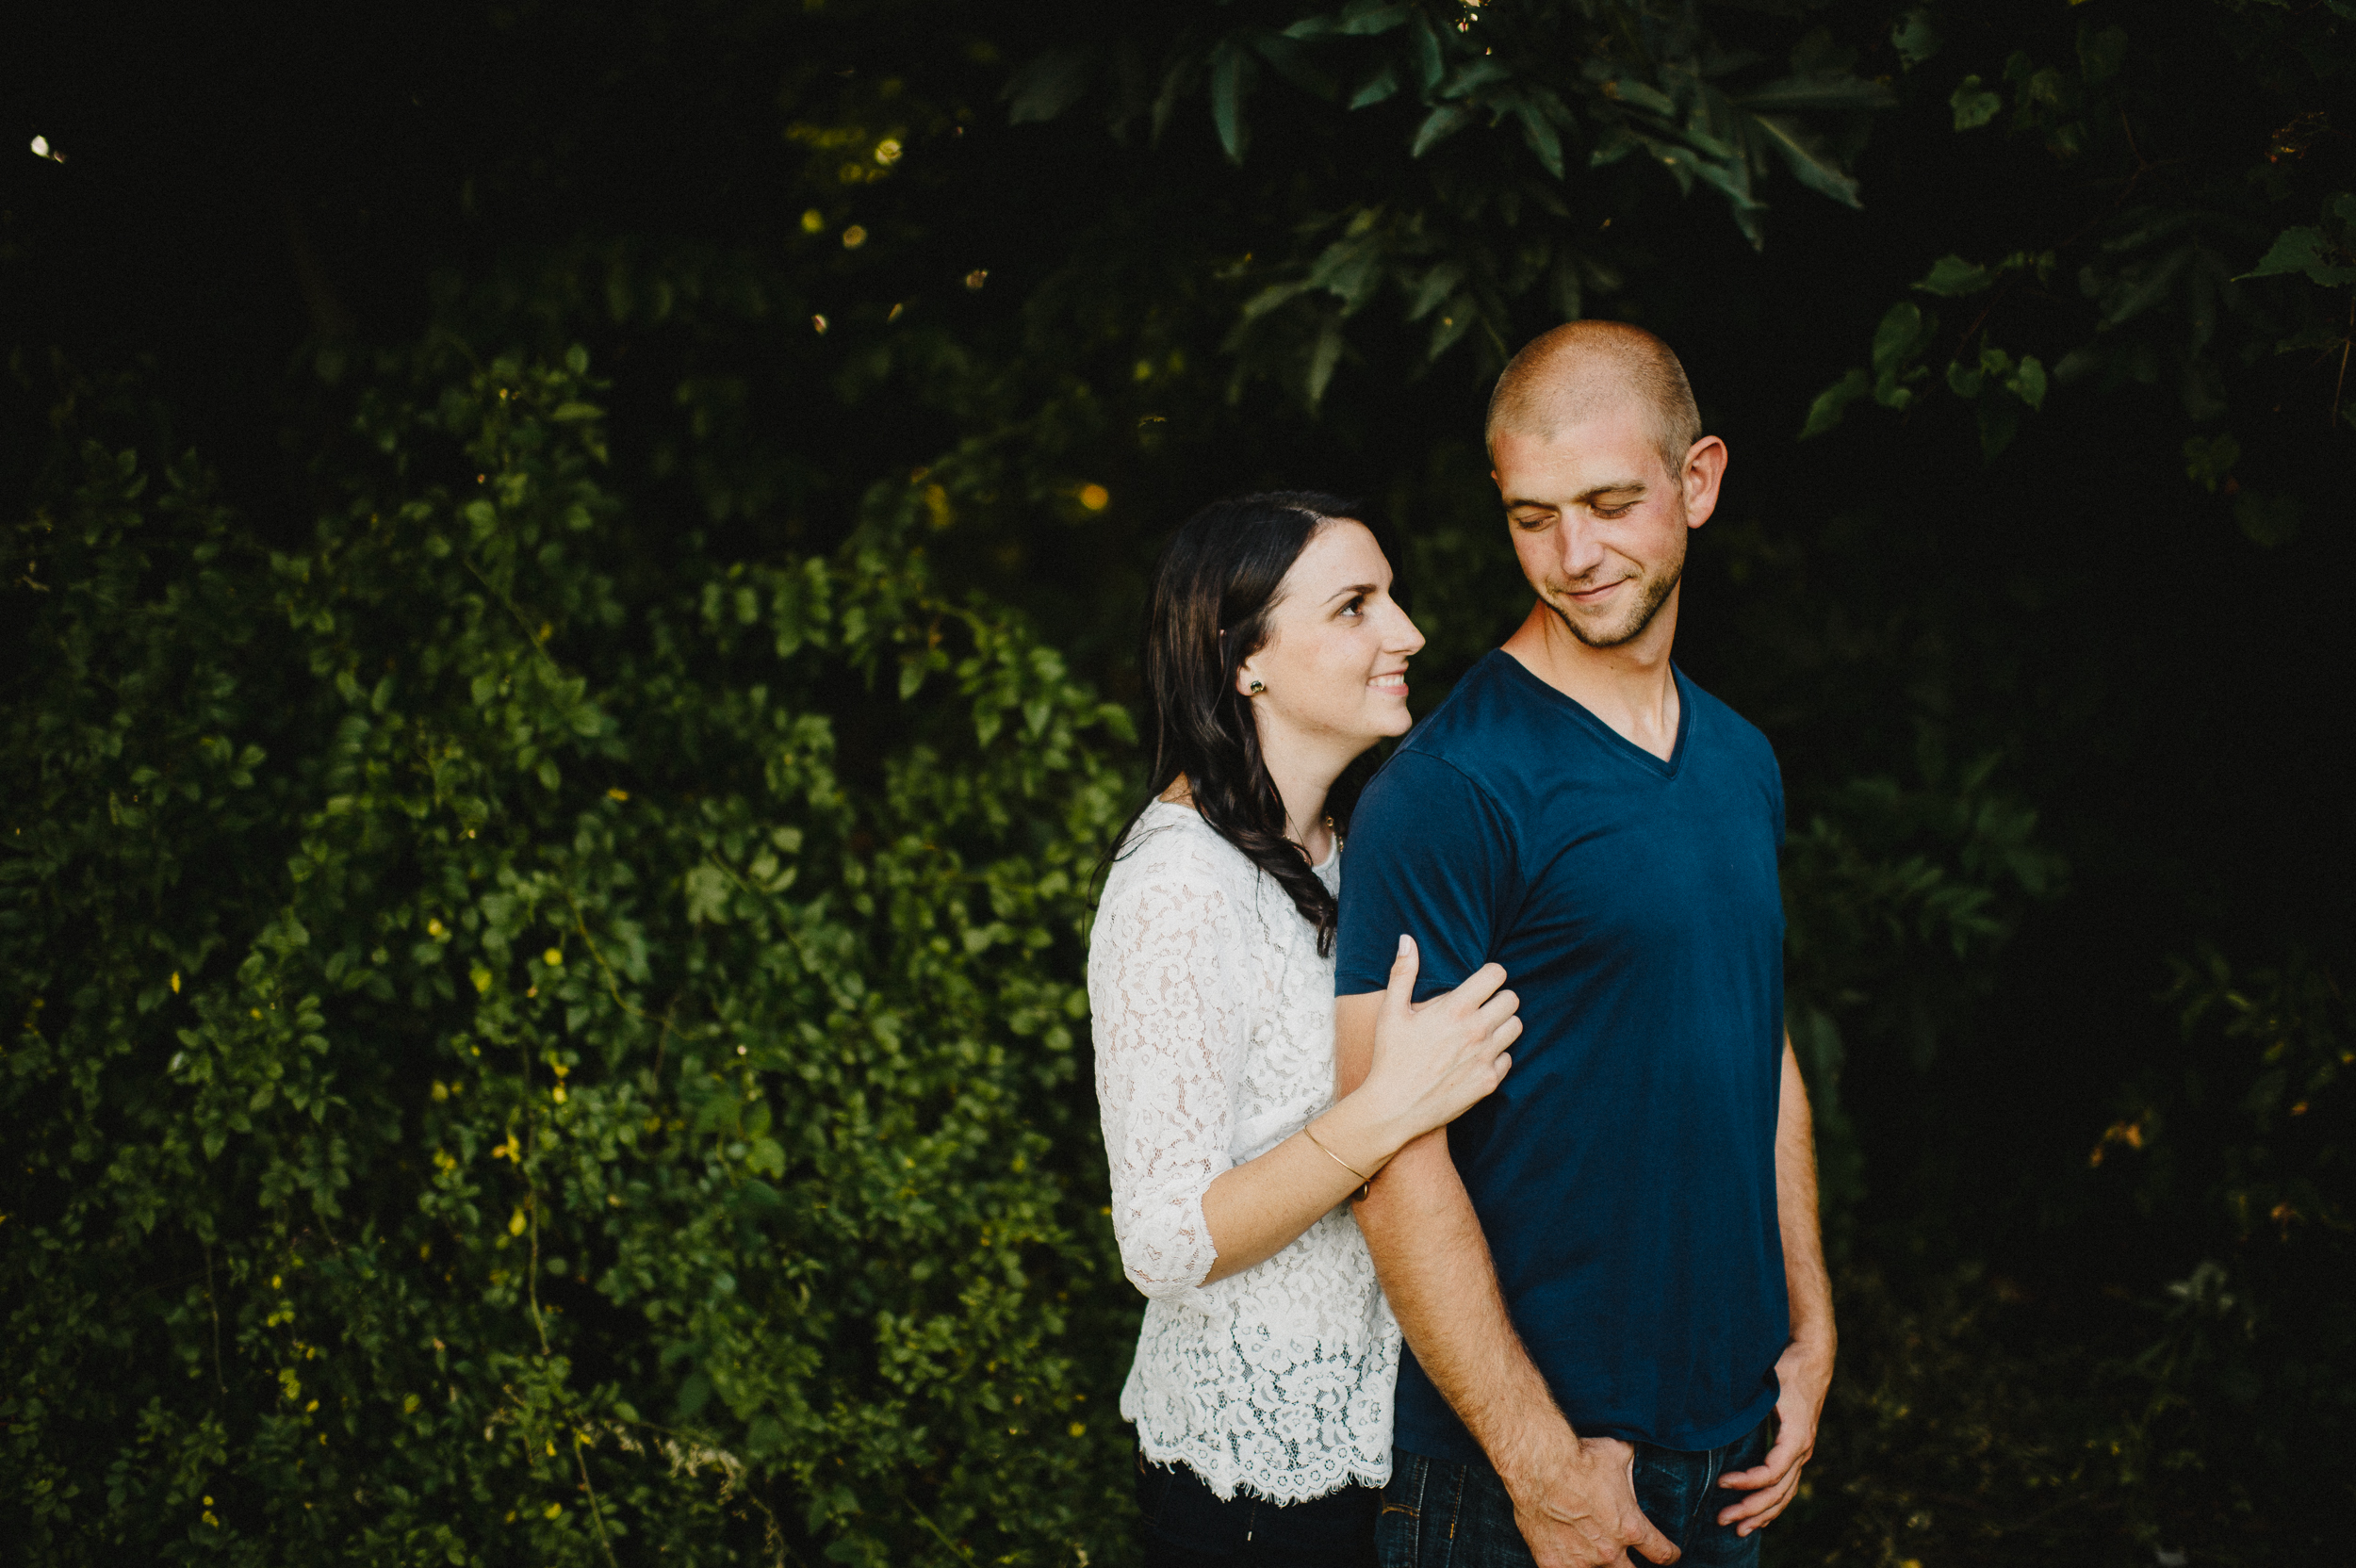 pat-robinson-photography-pa-engagement-session-8.jpg